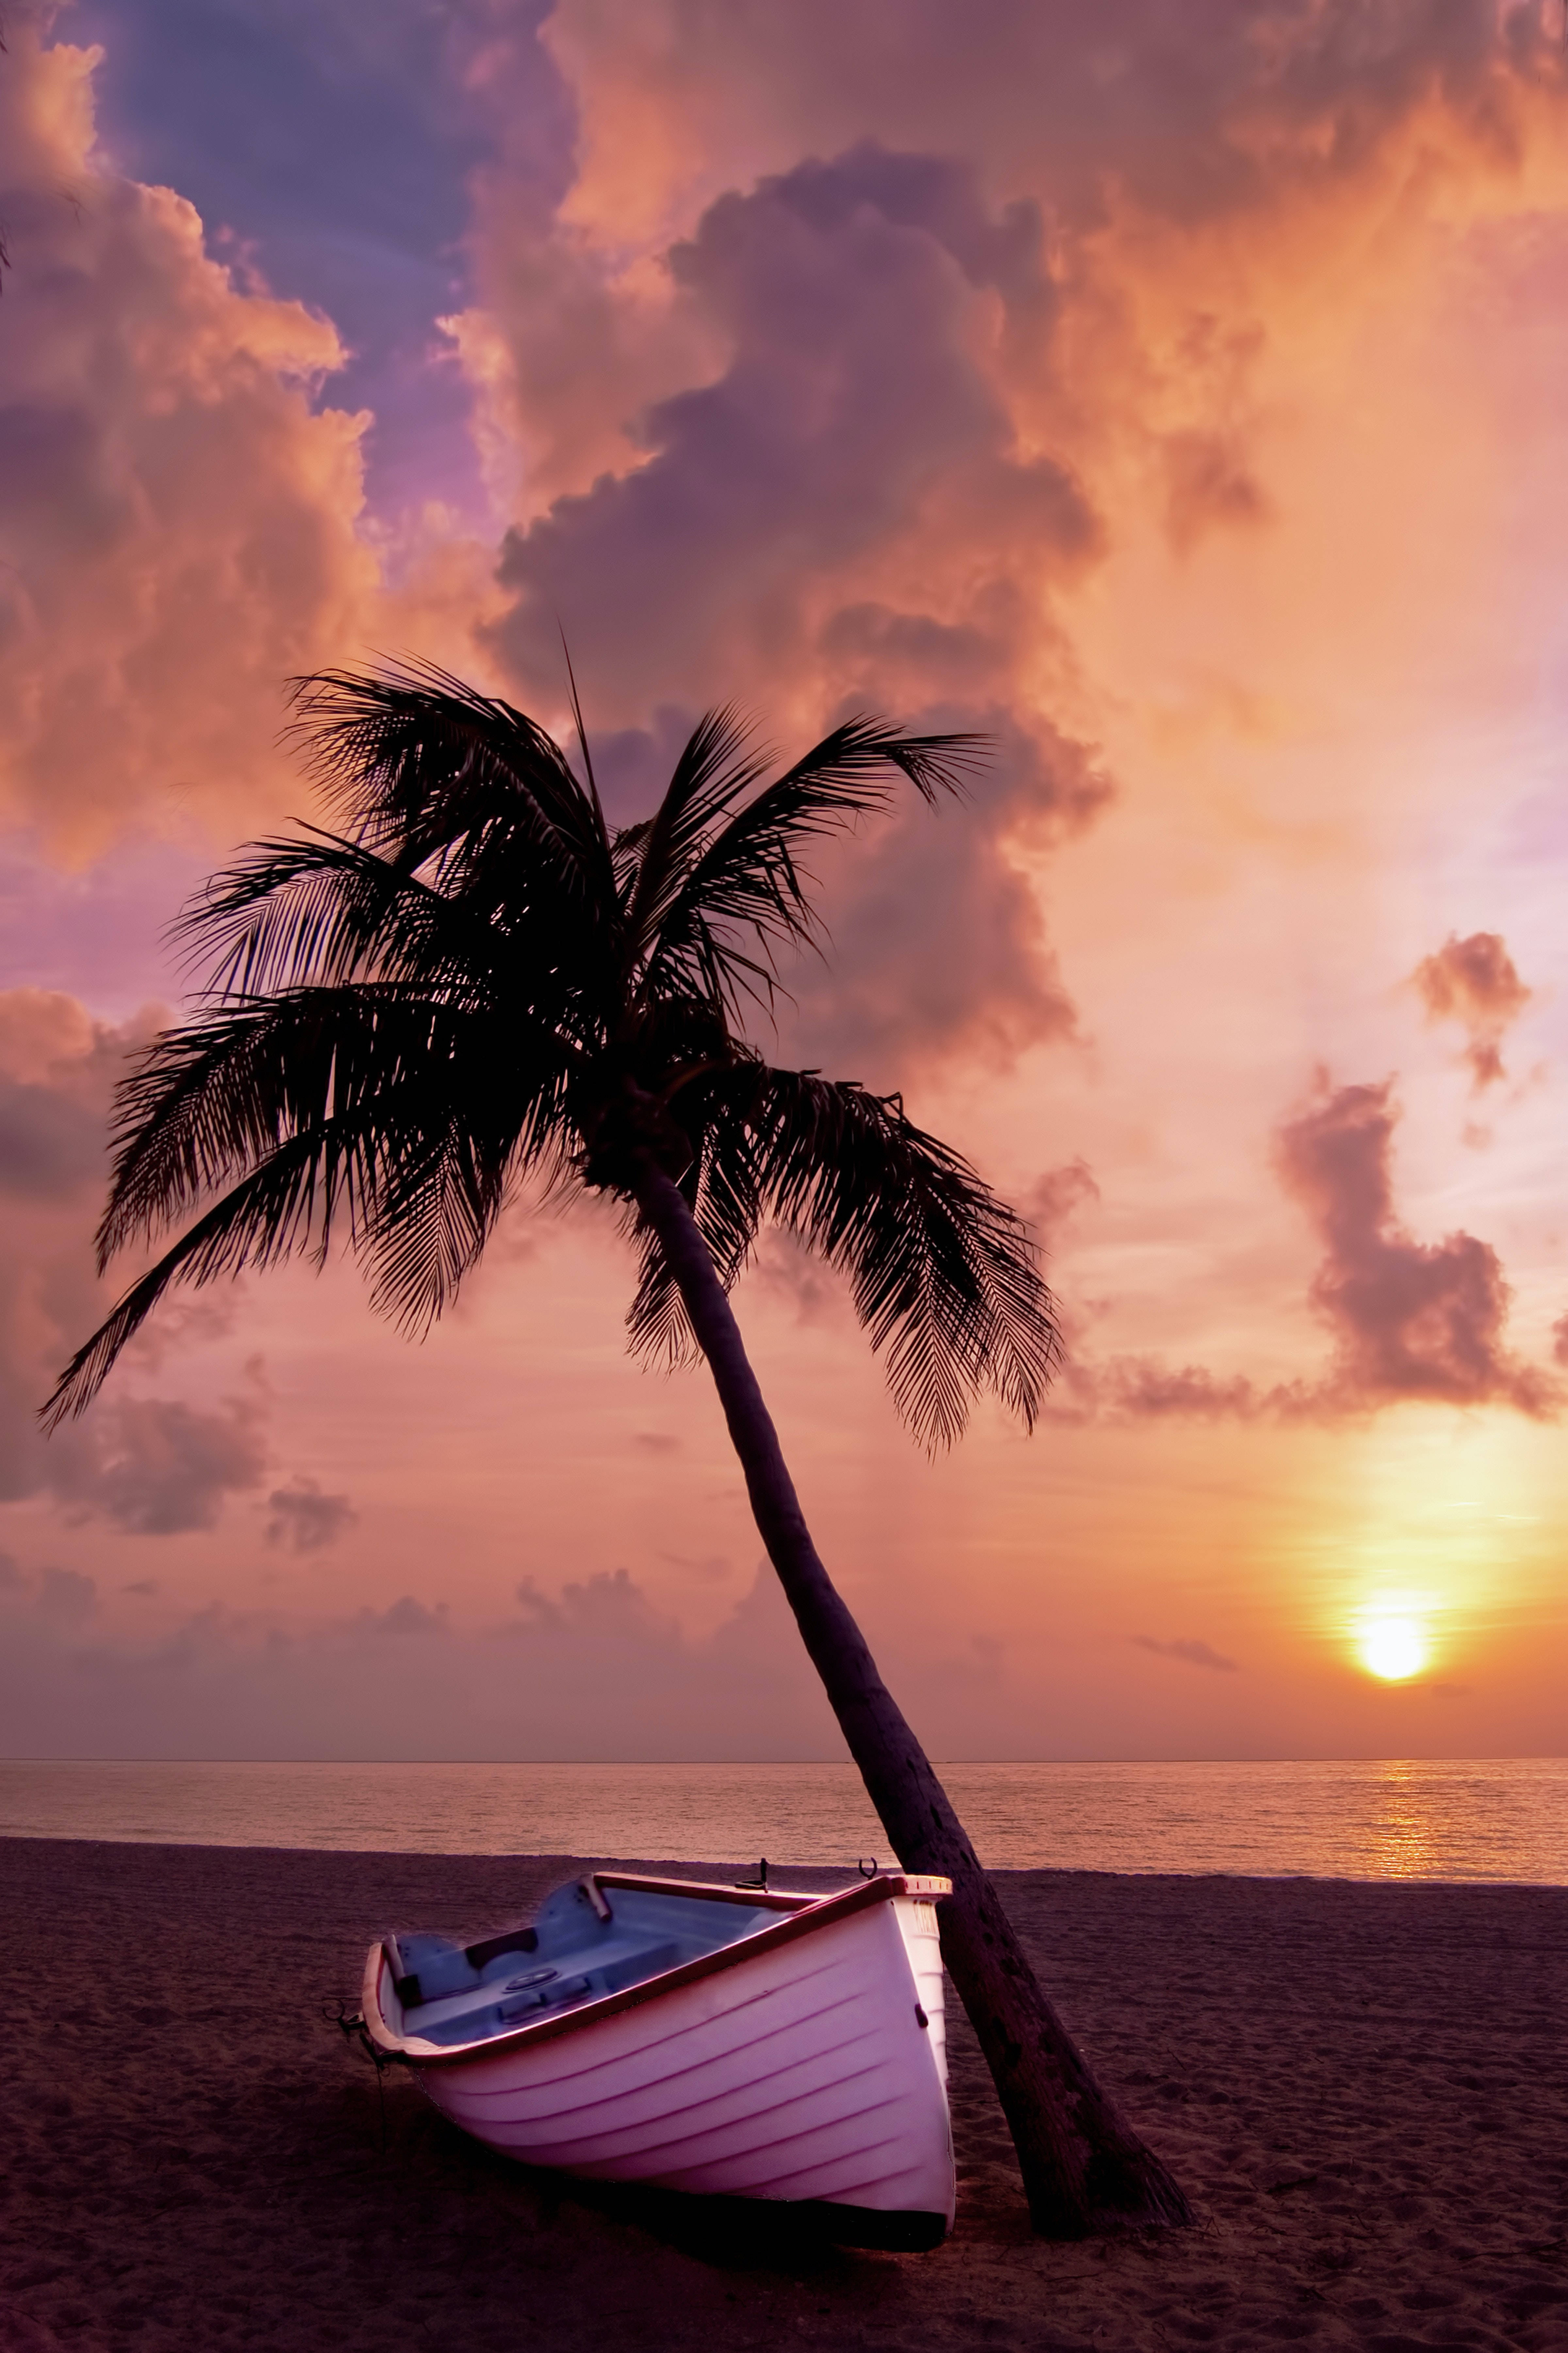 Boat And Palm Tree Beach Android Wallpaper